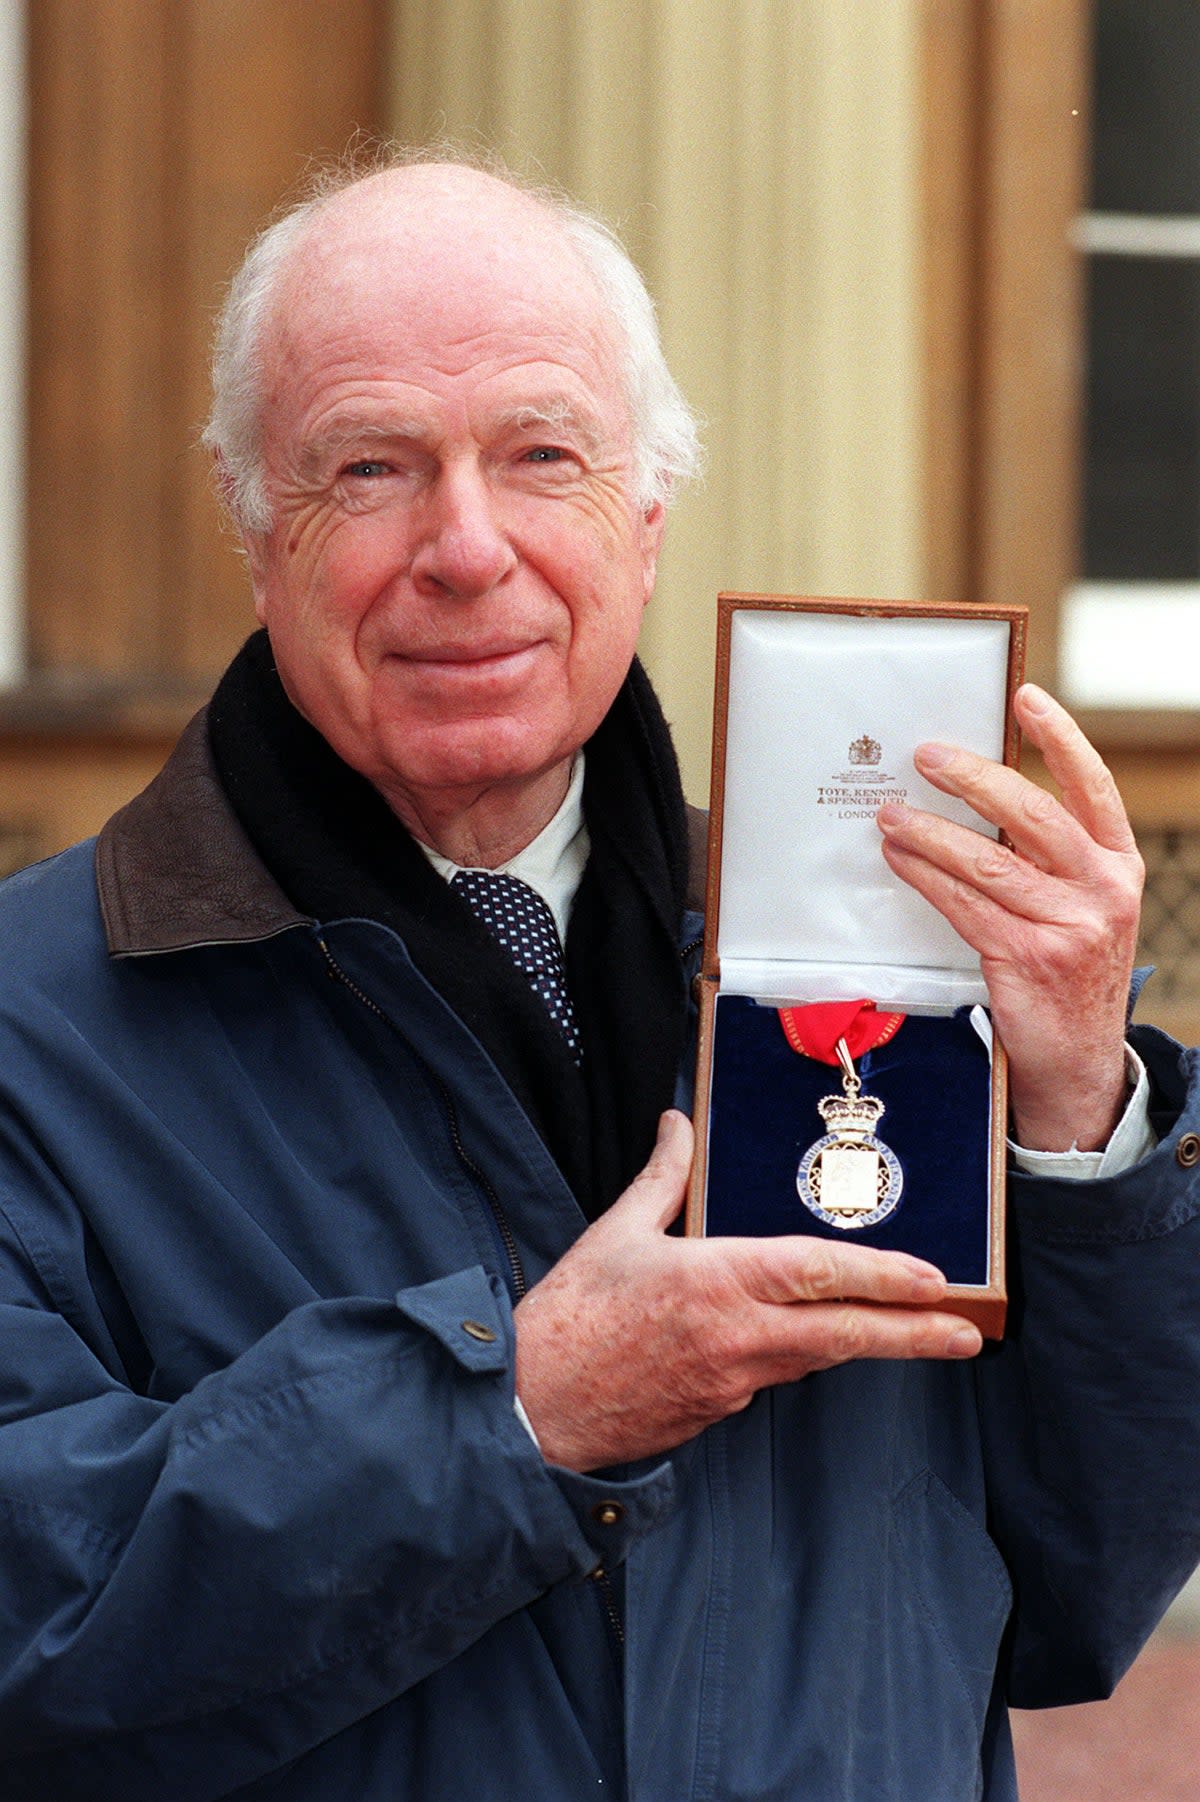 Theatre and film director Peter Brook has died in Paris at the age of 97, according to French media reports (Fiona Hanson/PA) (PA Archive)